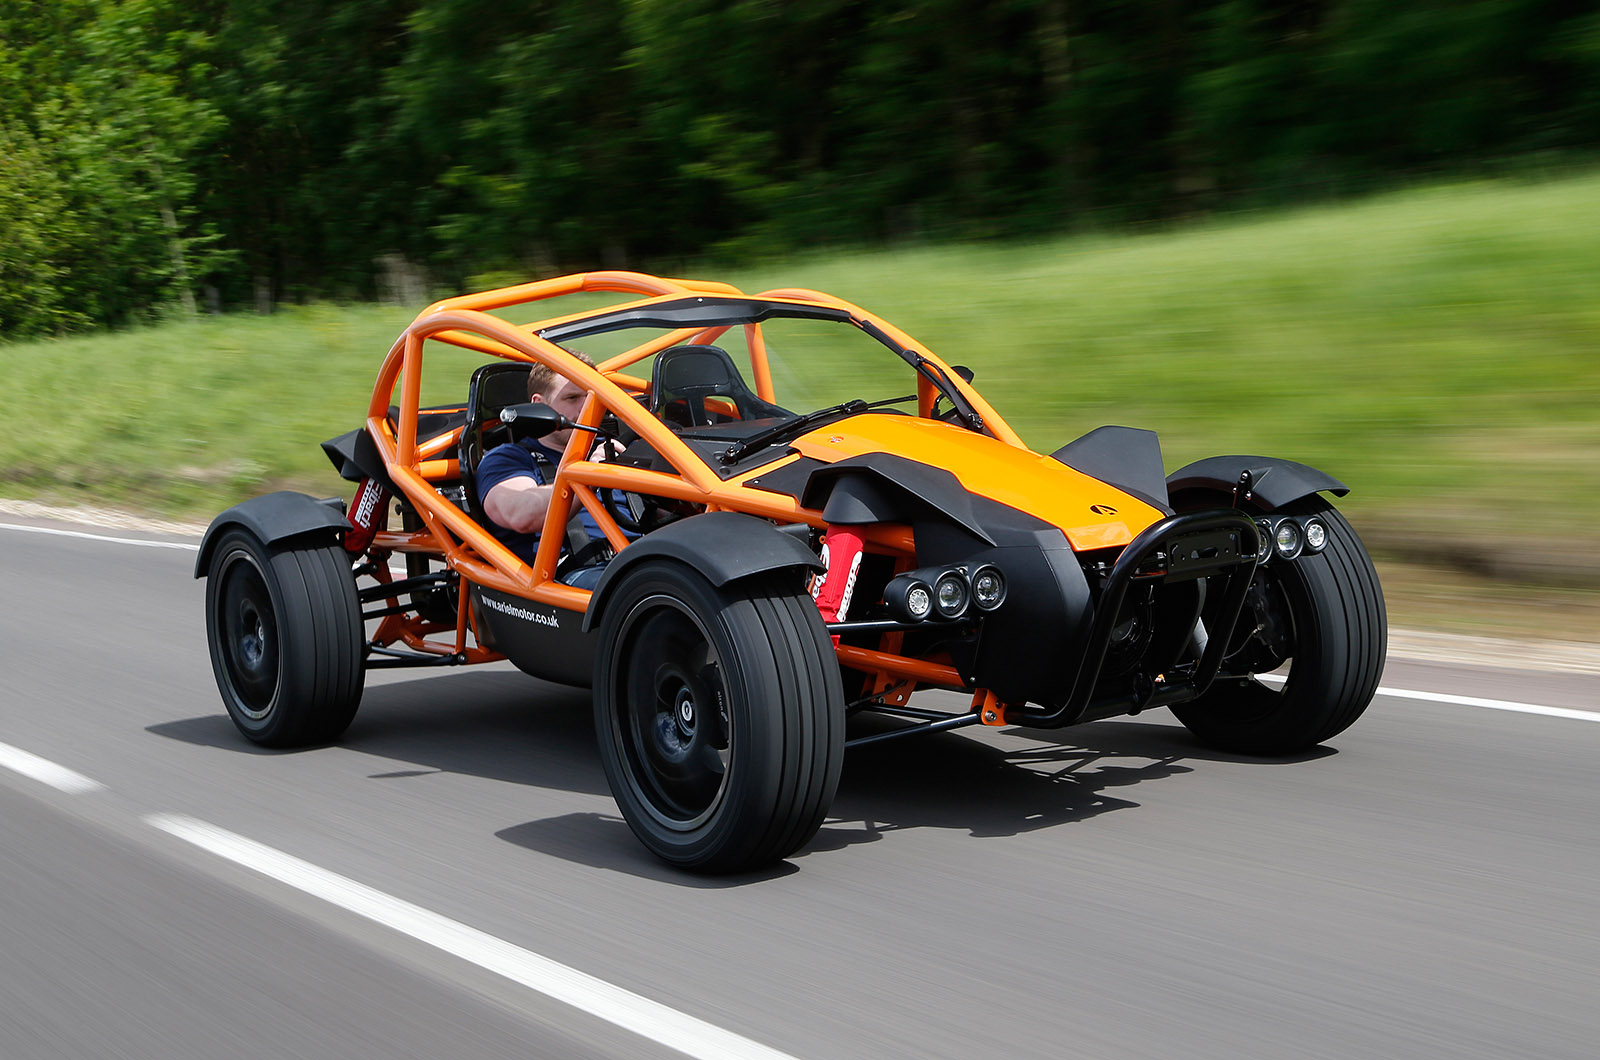 The 5 star Ariel Nomad